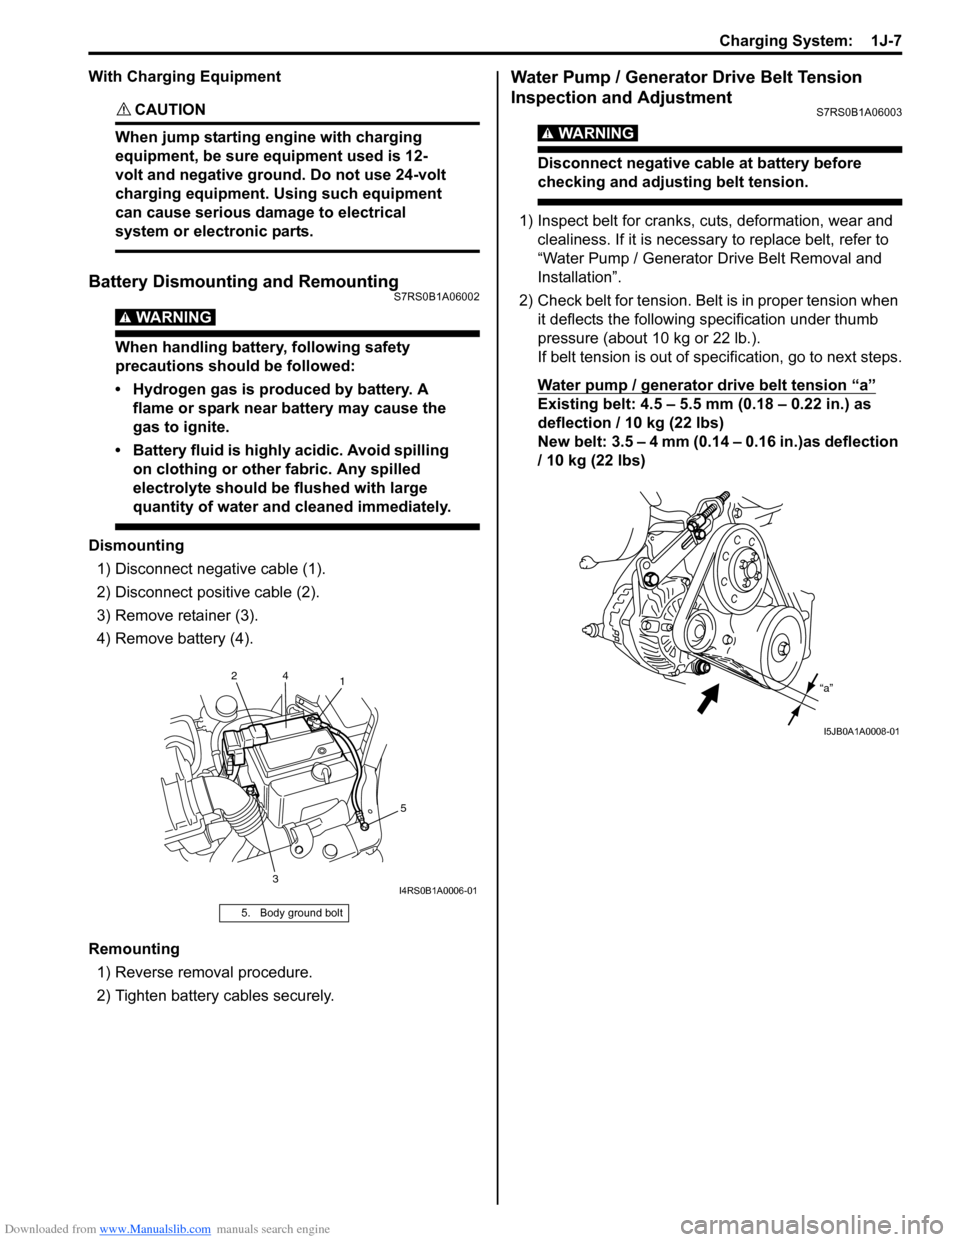 SUZUKI SWIFT 2008 2.G Service Repair Manual Downloaded from www.Manualslib.com manuals search engine Charging System:  1J-7
With Charging Equipment
CAUTION! 
When jump starting engine with charging 
equipment, be sure equipment used is 12-
volt